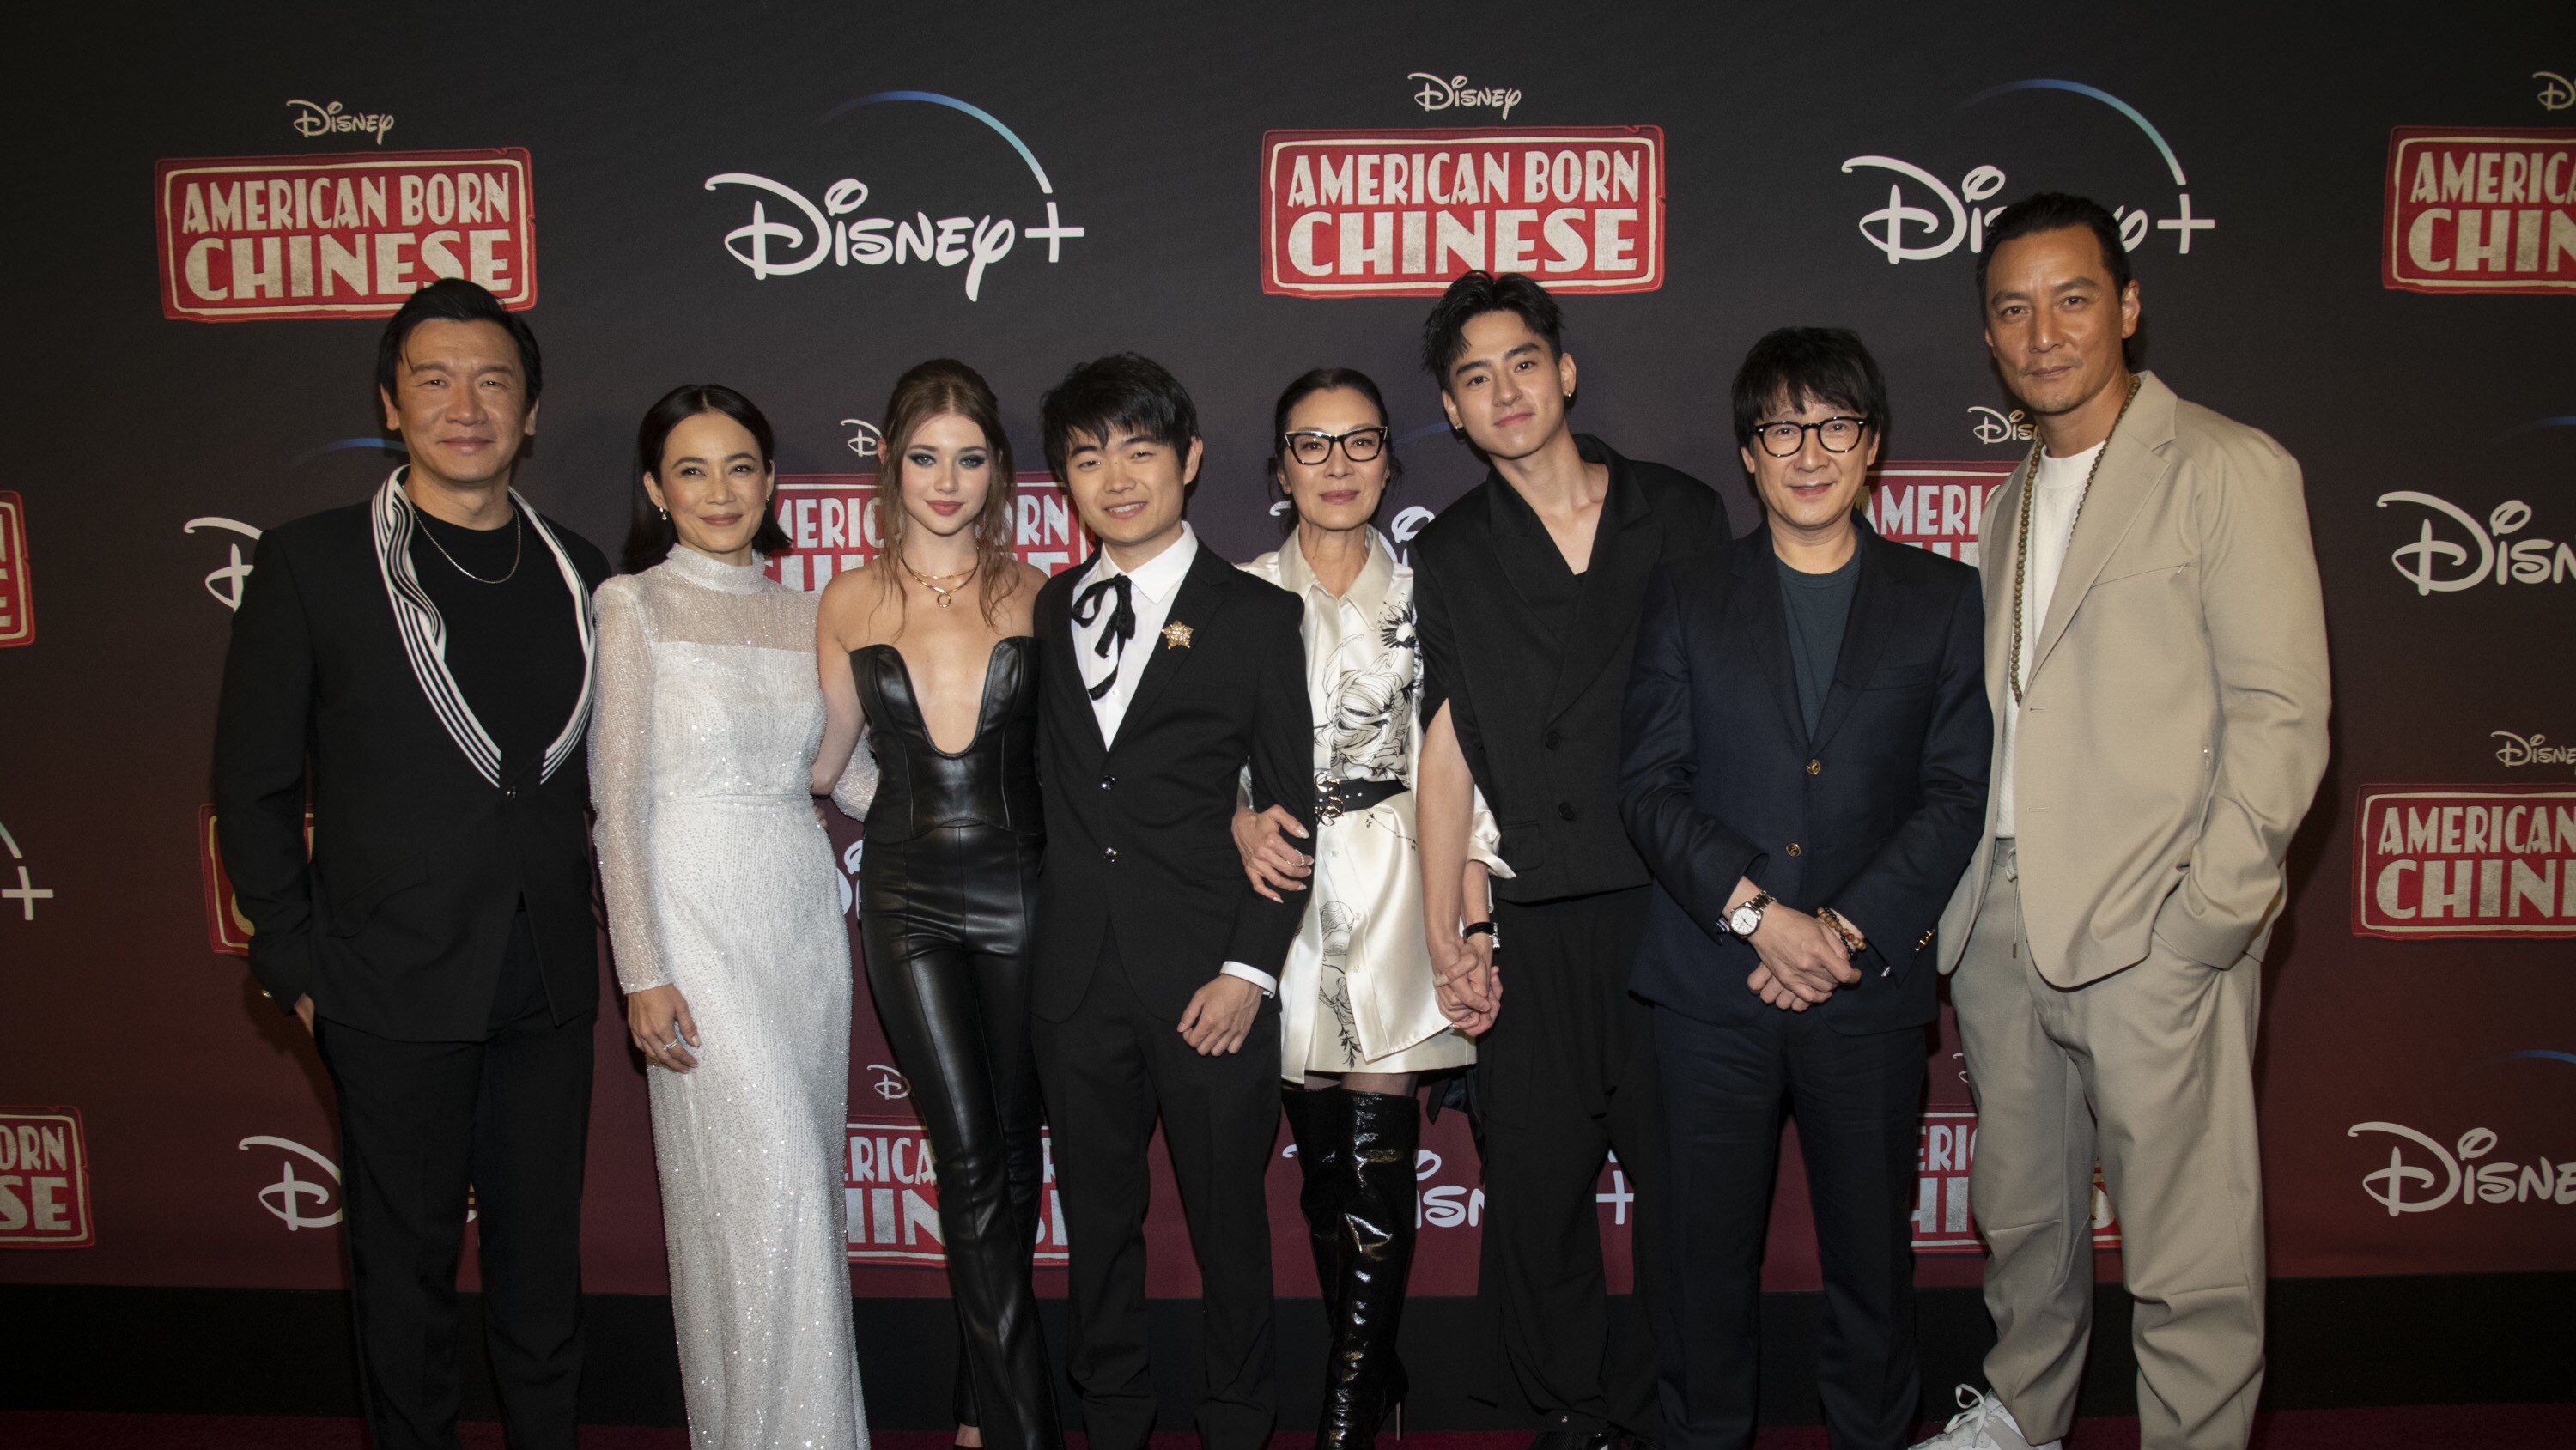 Stars Of The Action-Comedy Disney+ Original Series “American Born Chinese” Attend New York Premiere 